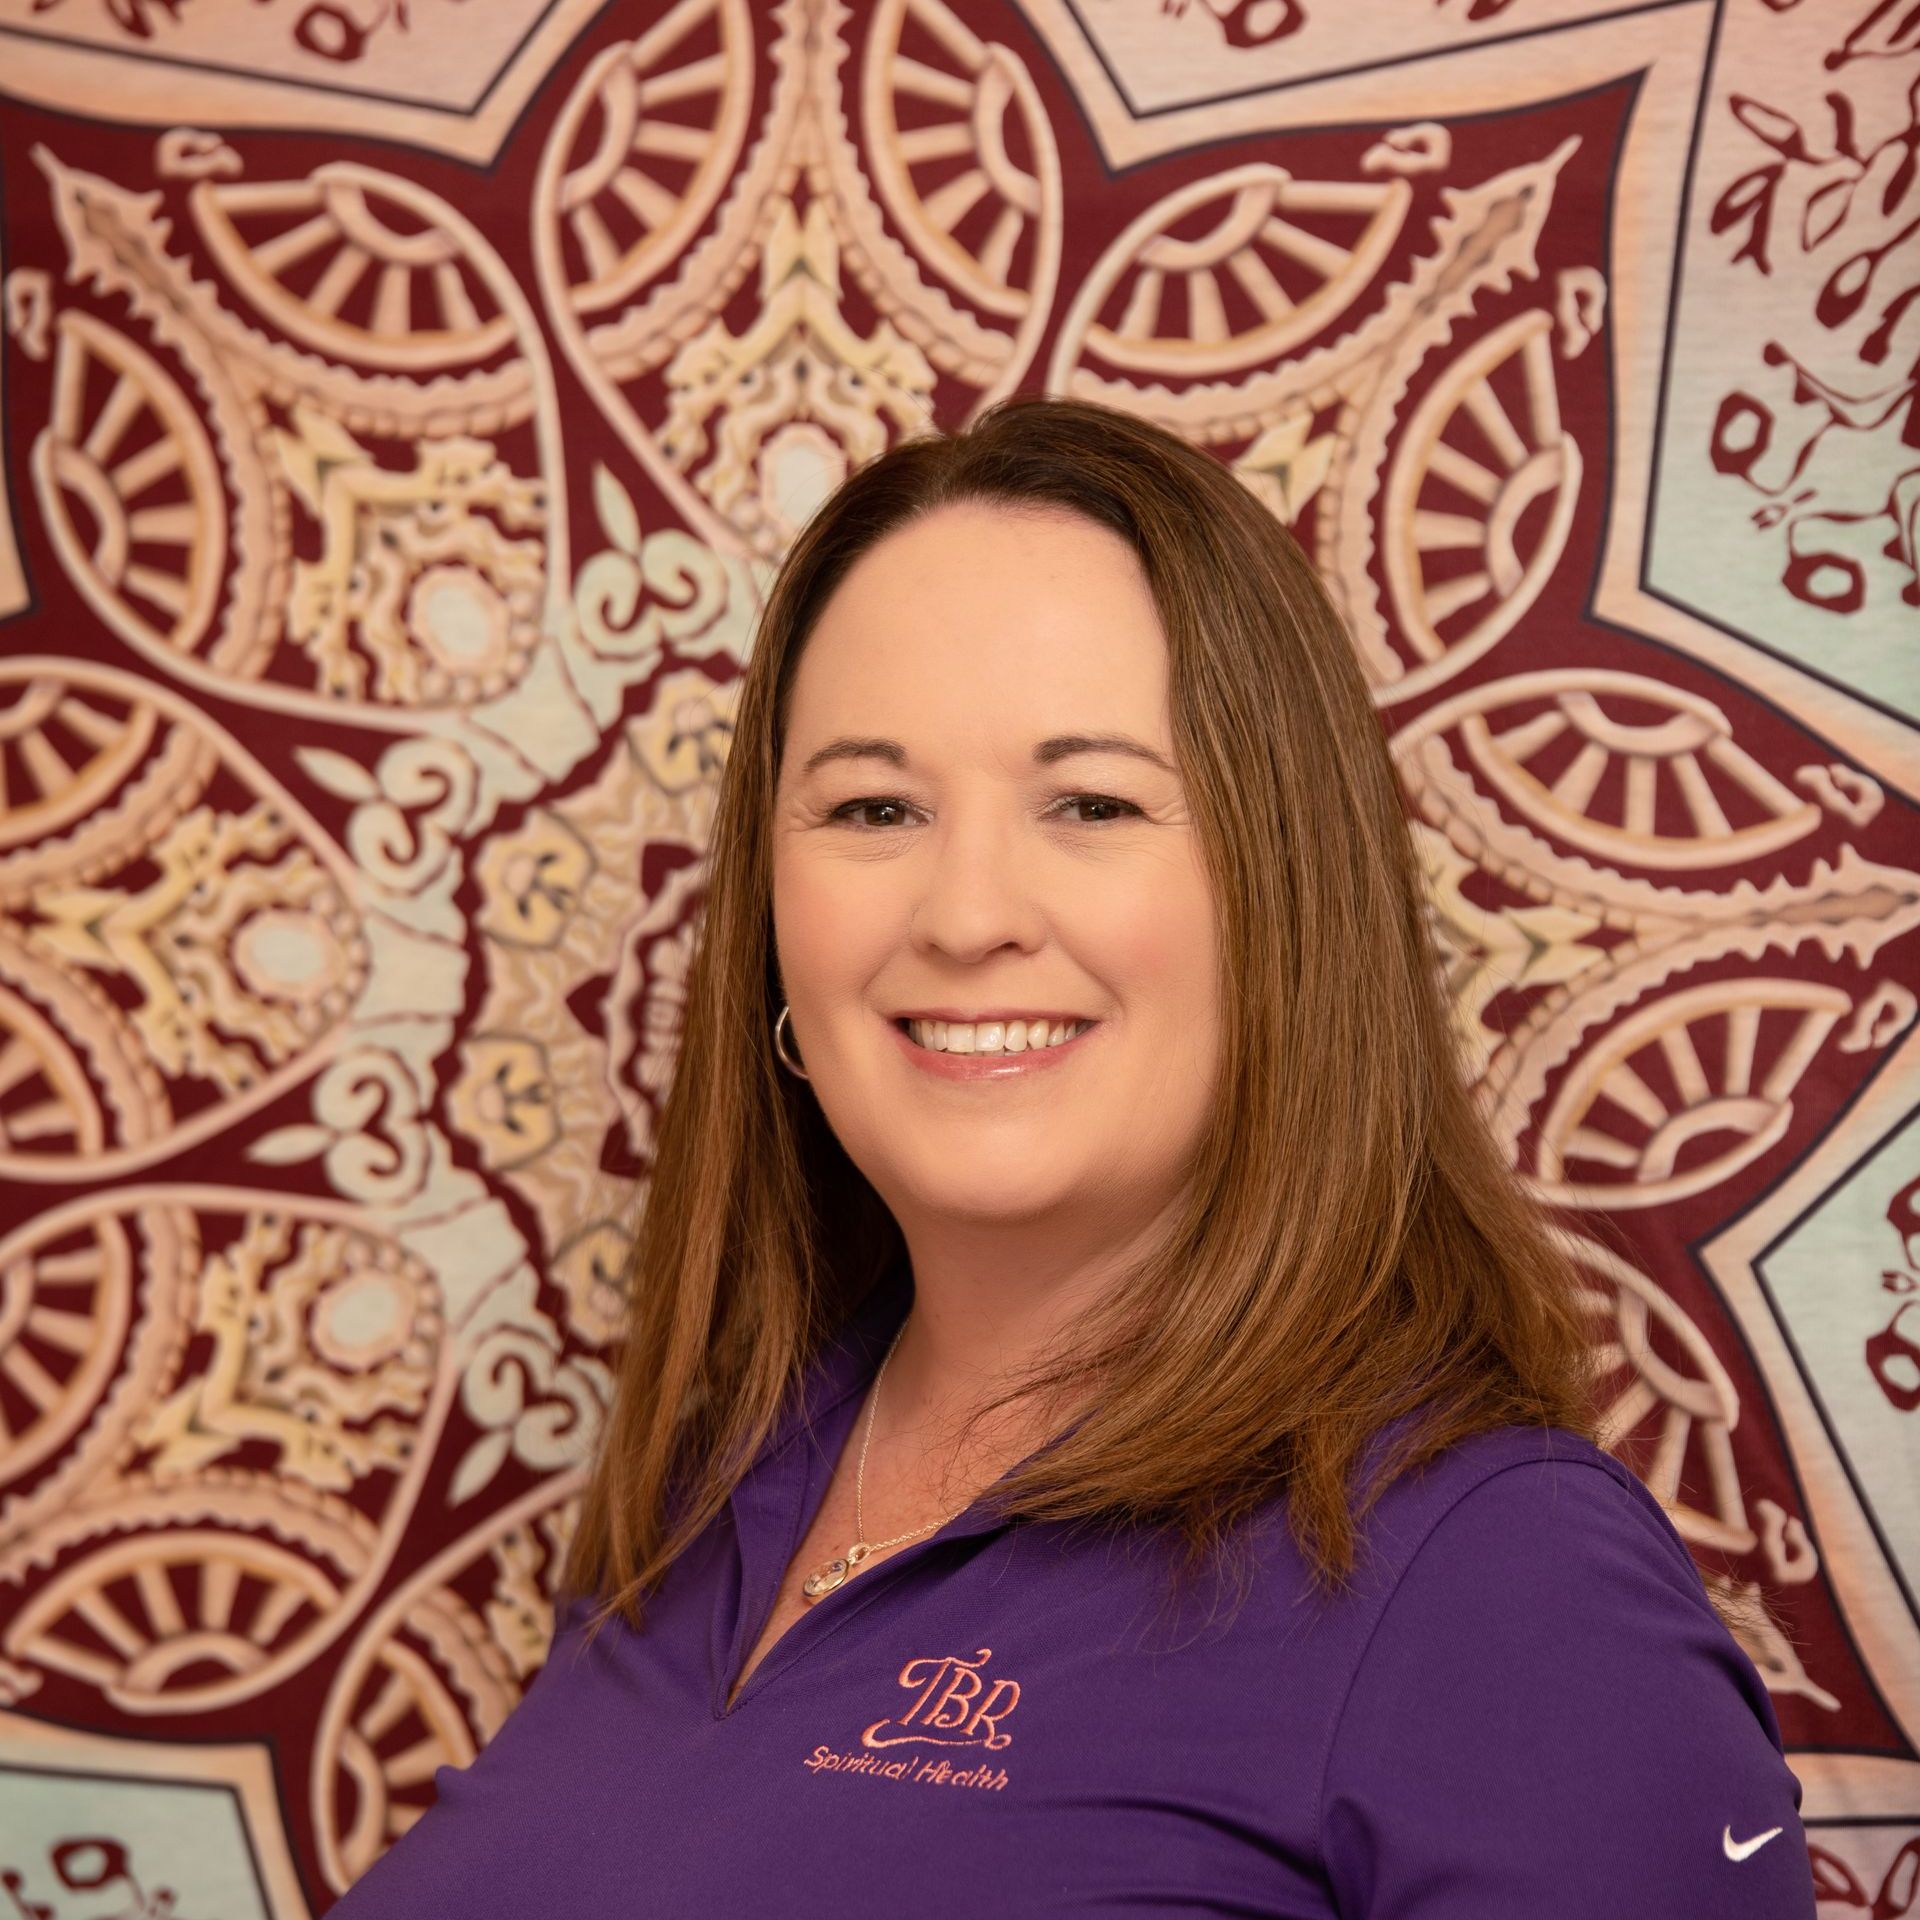 A woman in a purple shirt is smiling in front of a mandala tapestry.